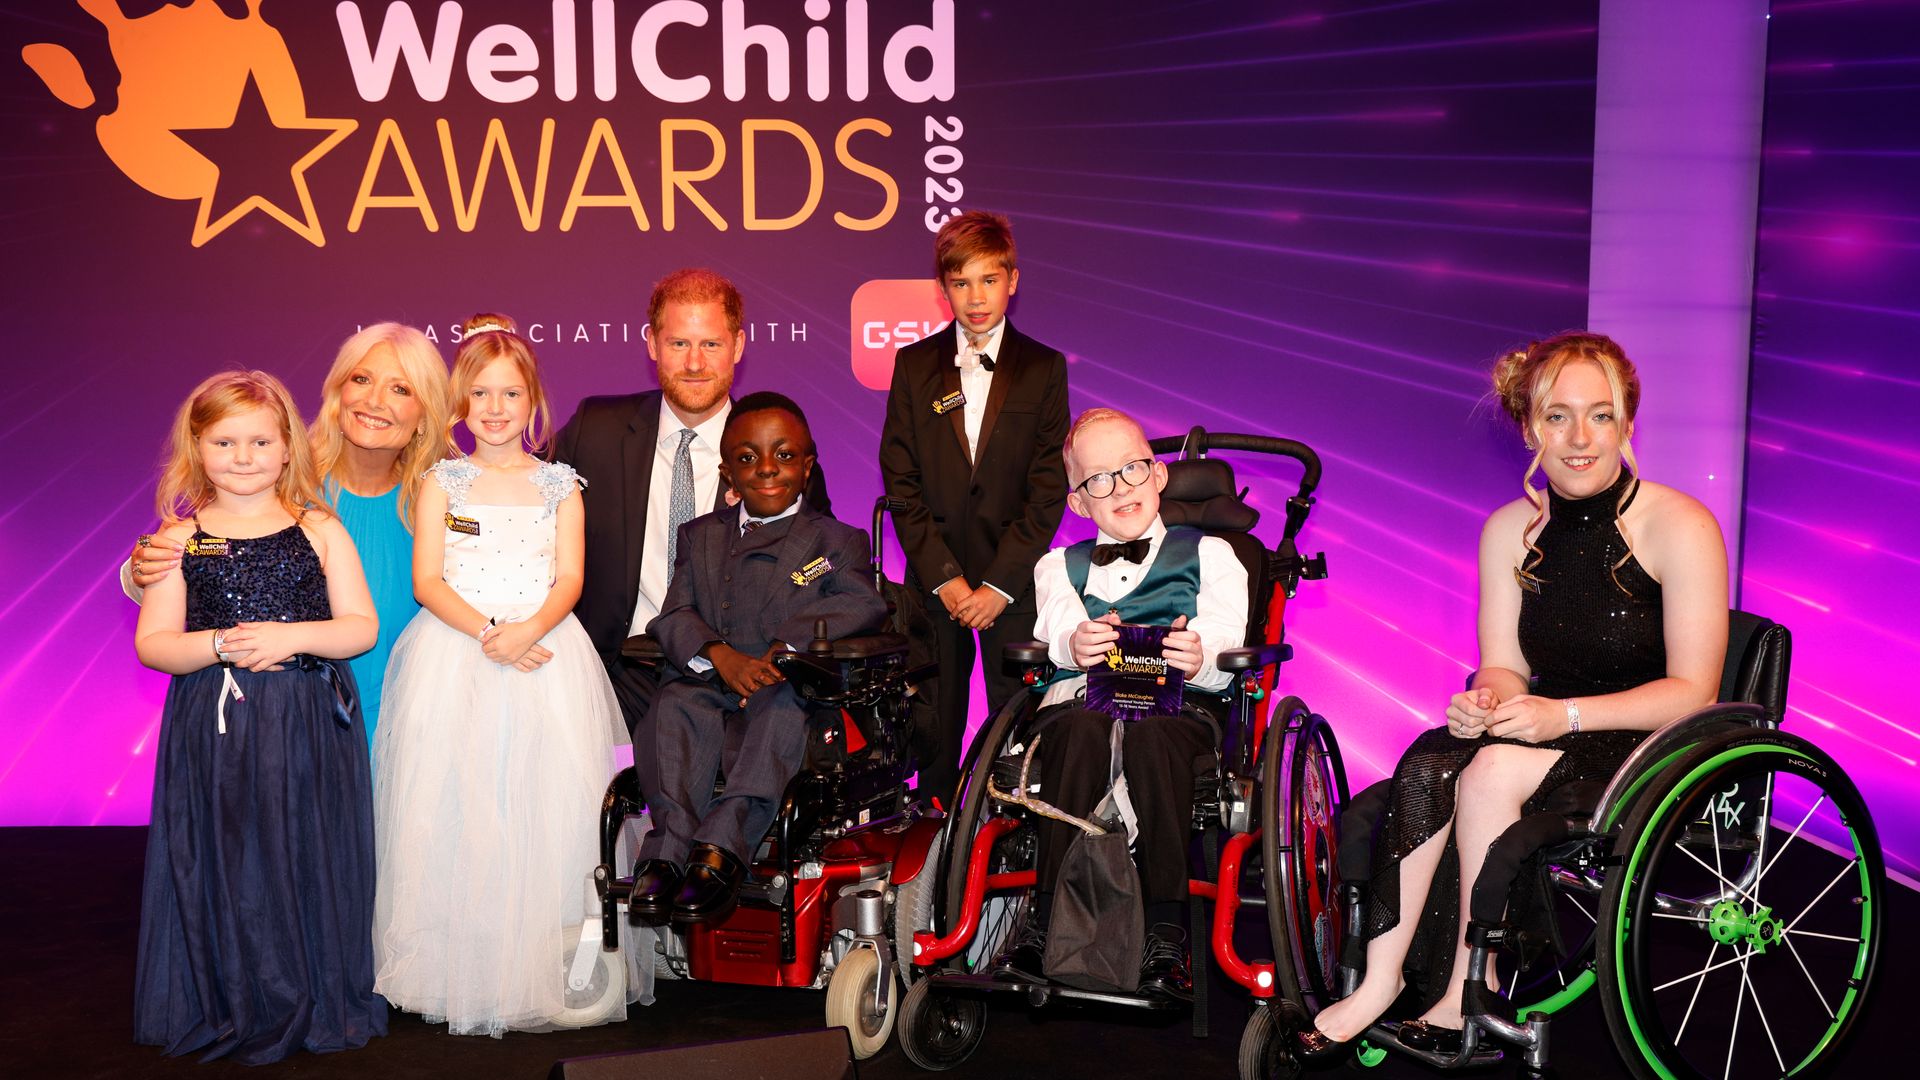 Harry attended the WellChild Awards 2023 in London